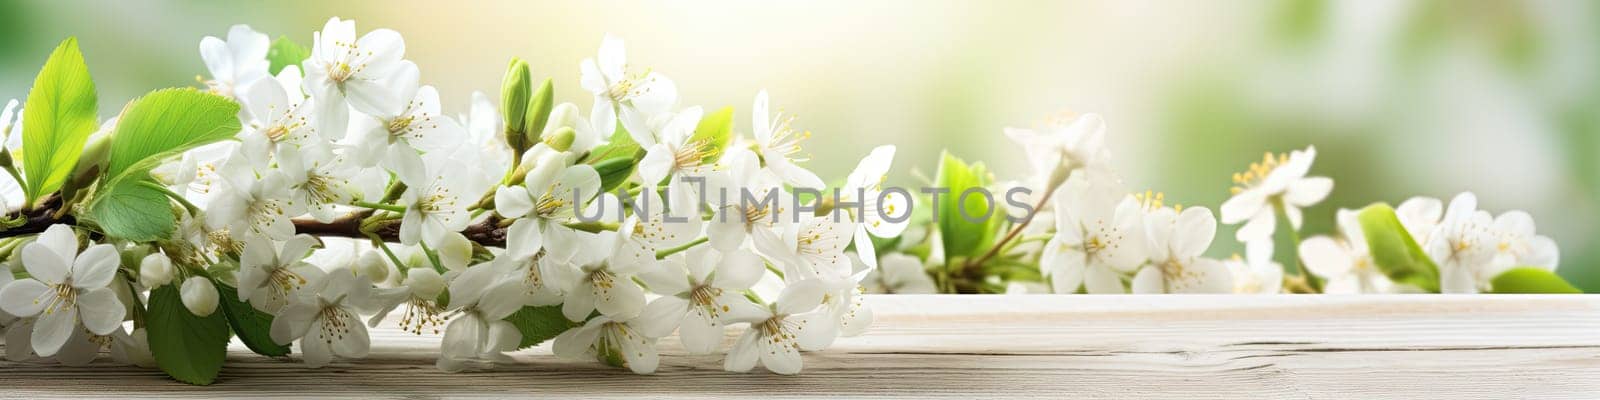 Spring background with a white blossoms, flooring concept